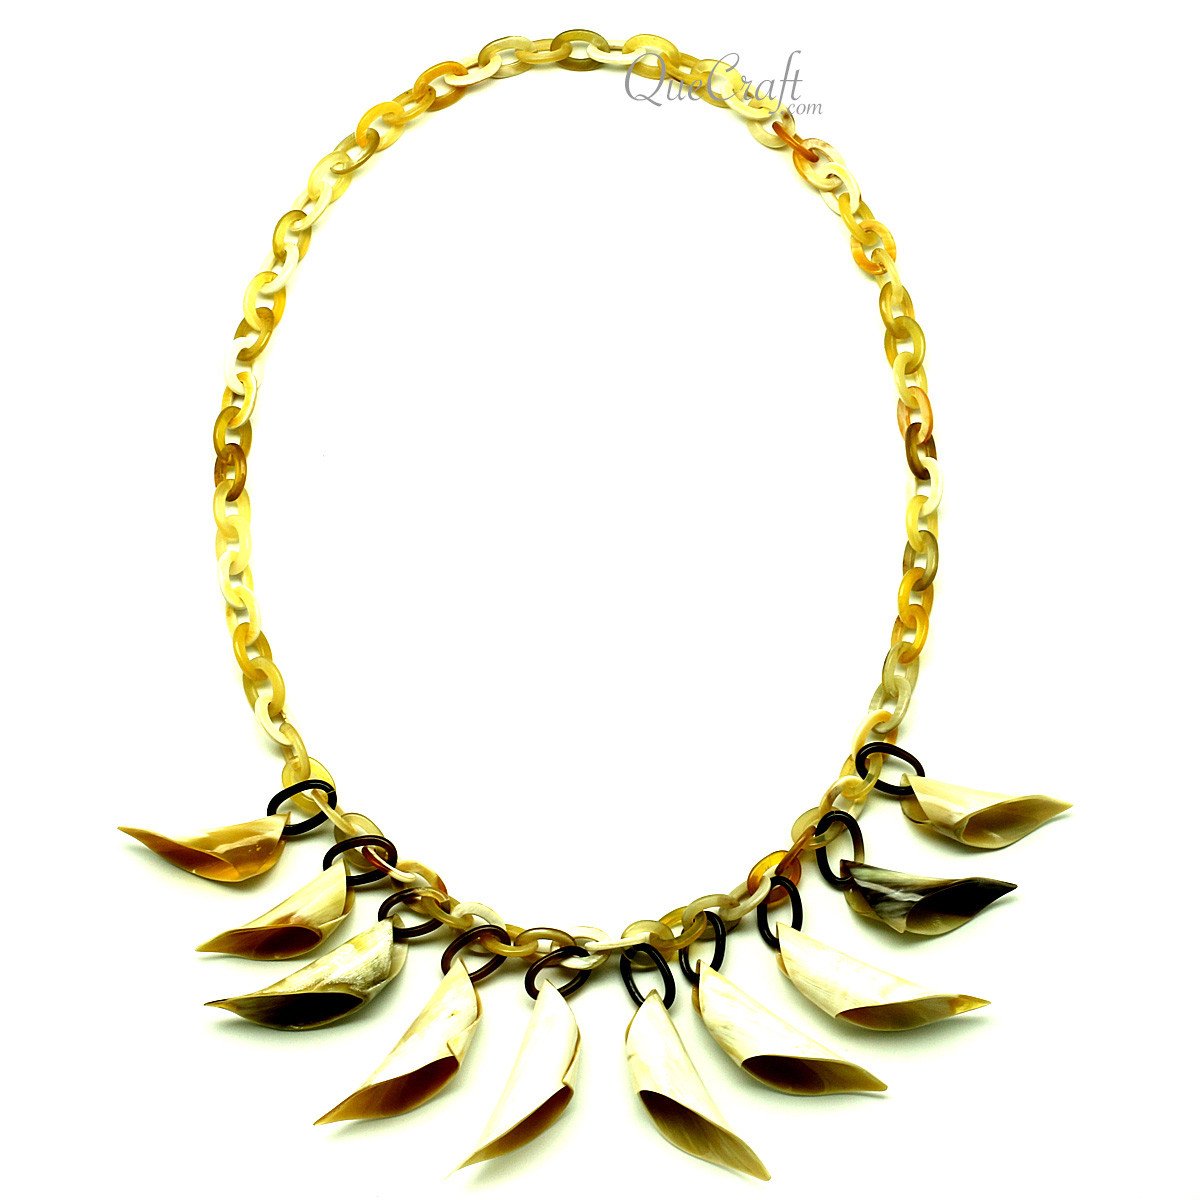 Horn Chain Necklace #12800 - HORN JEWELRY